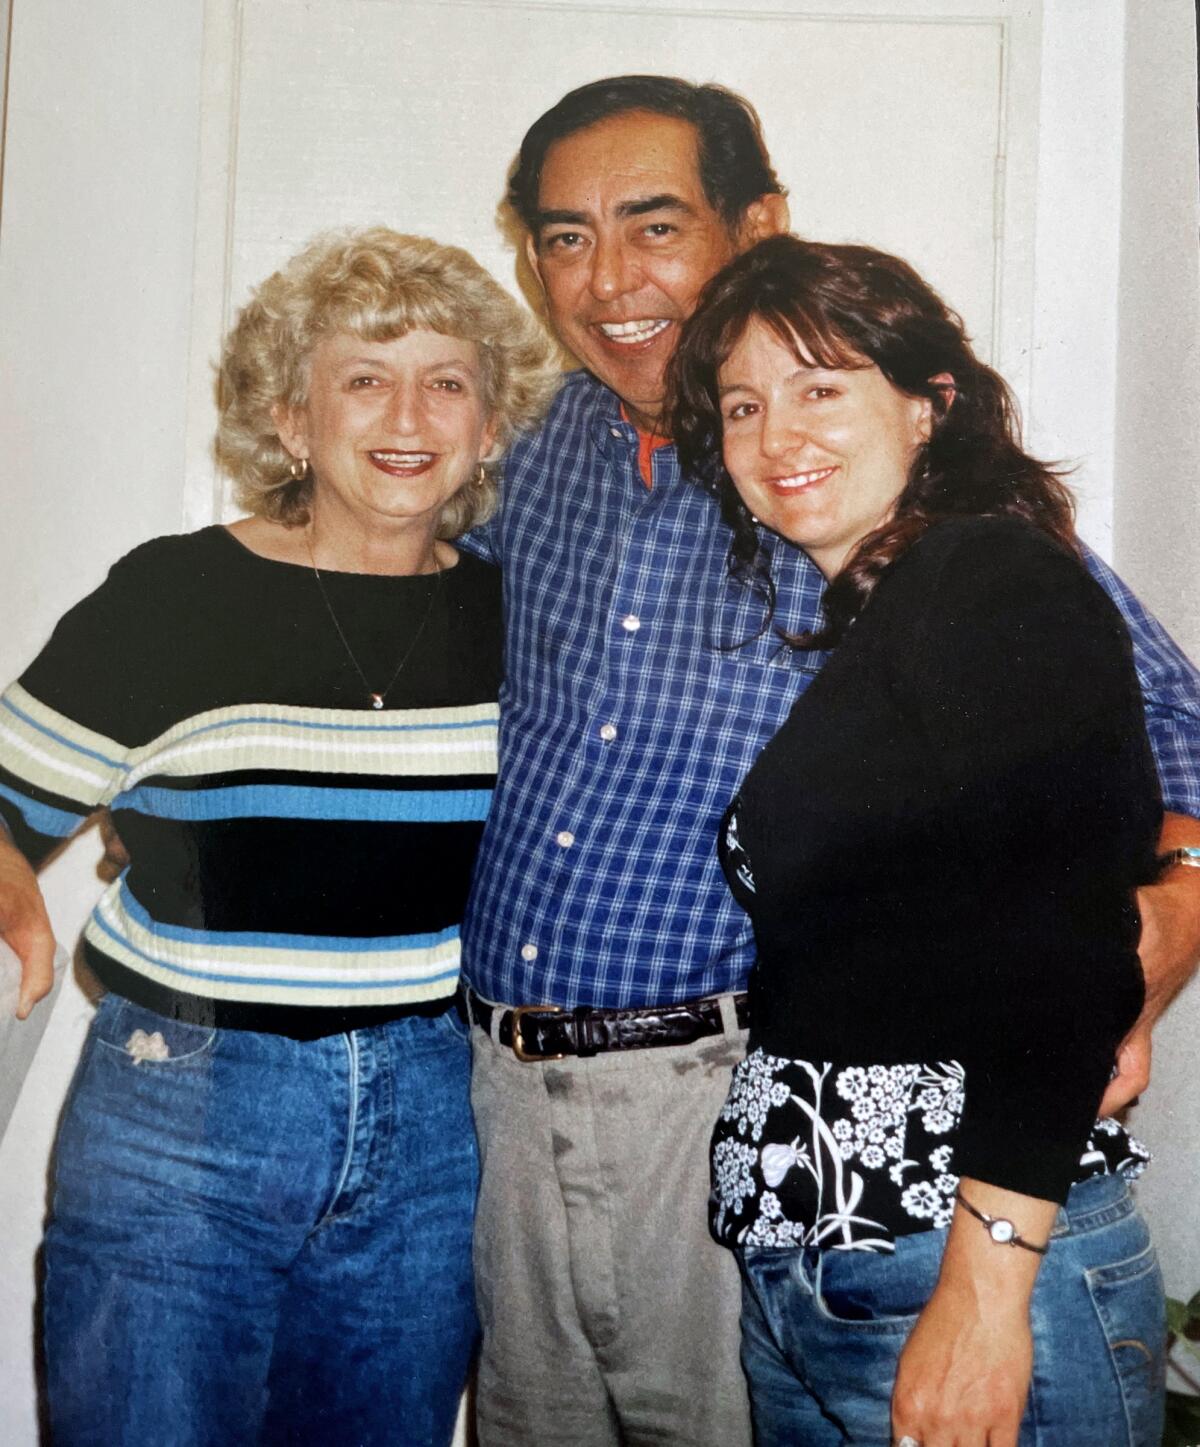 Jesse Macias with his arms around two women, one on either side of him